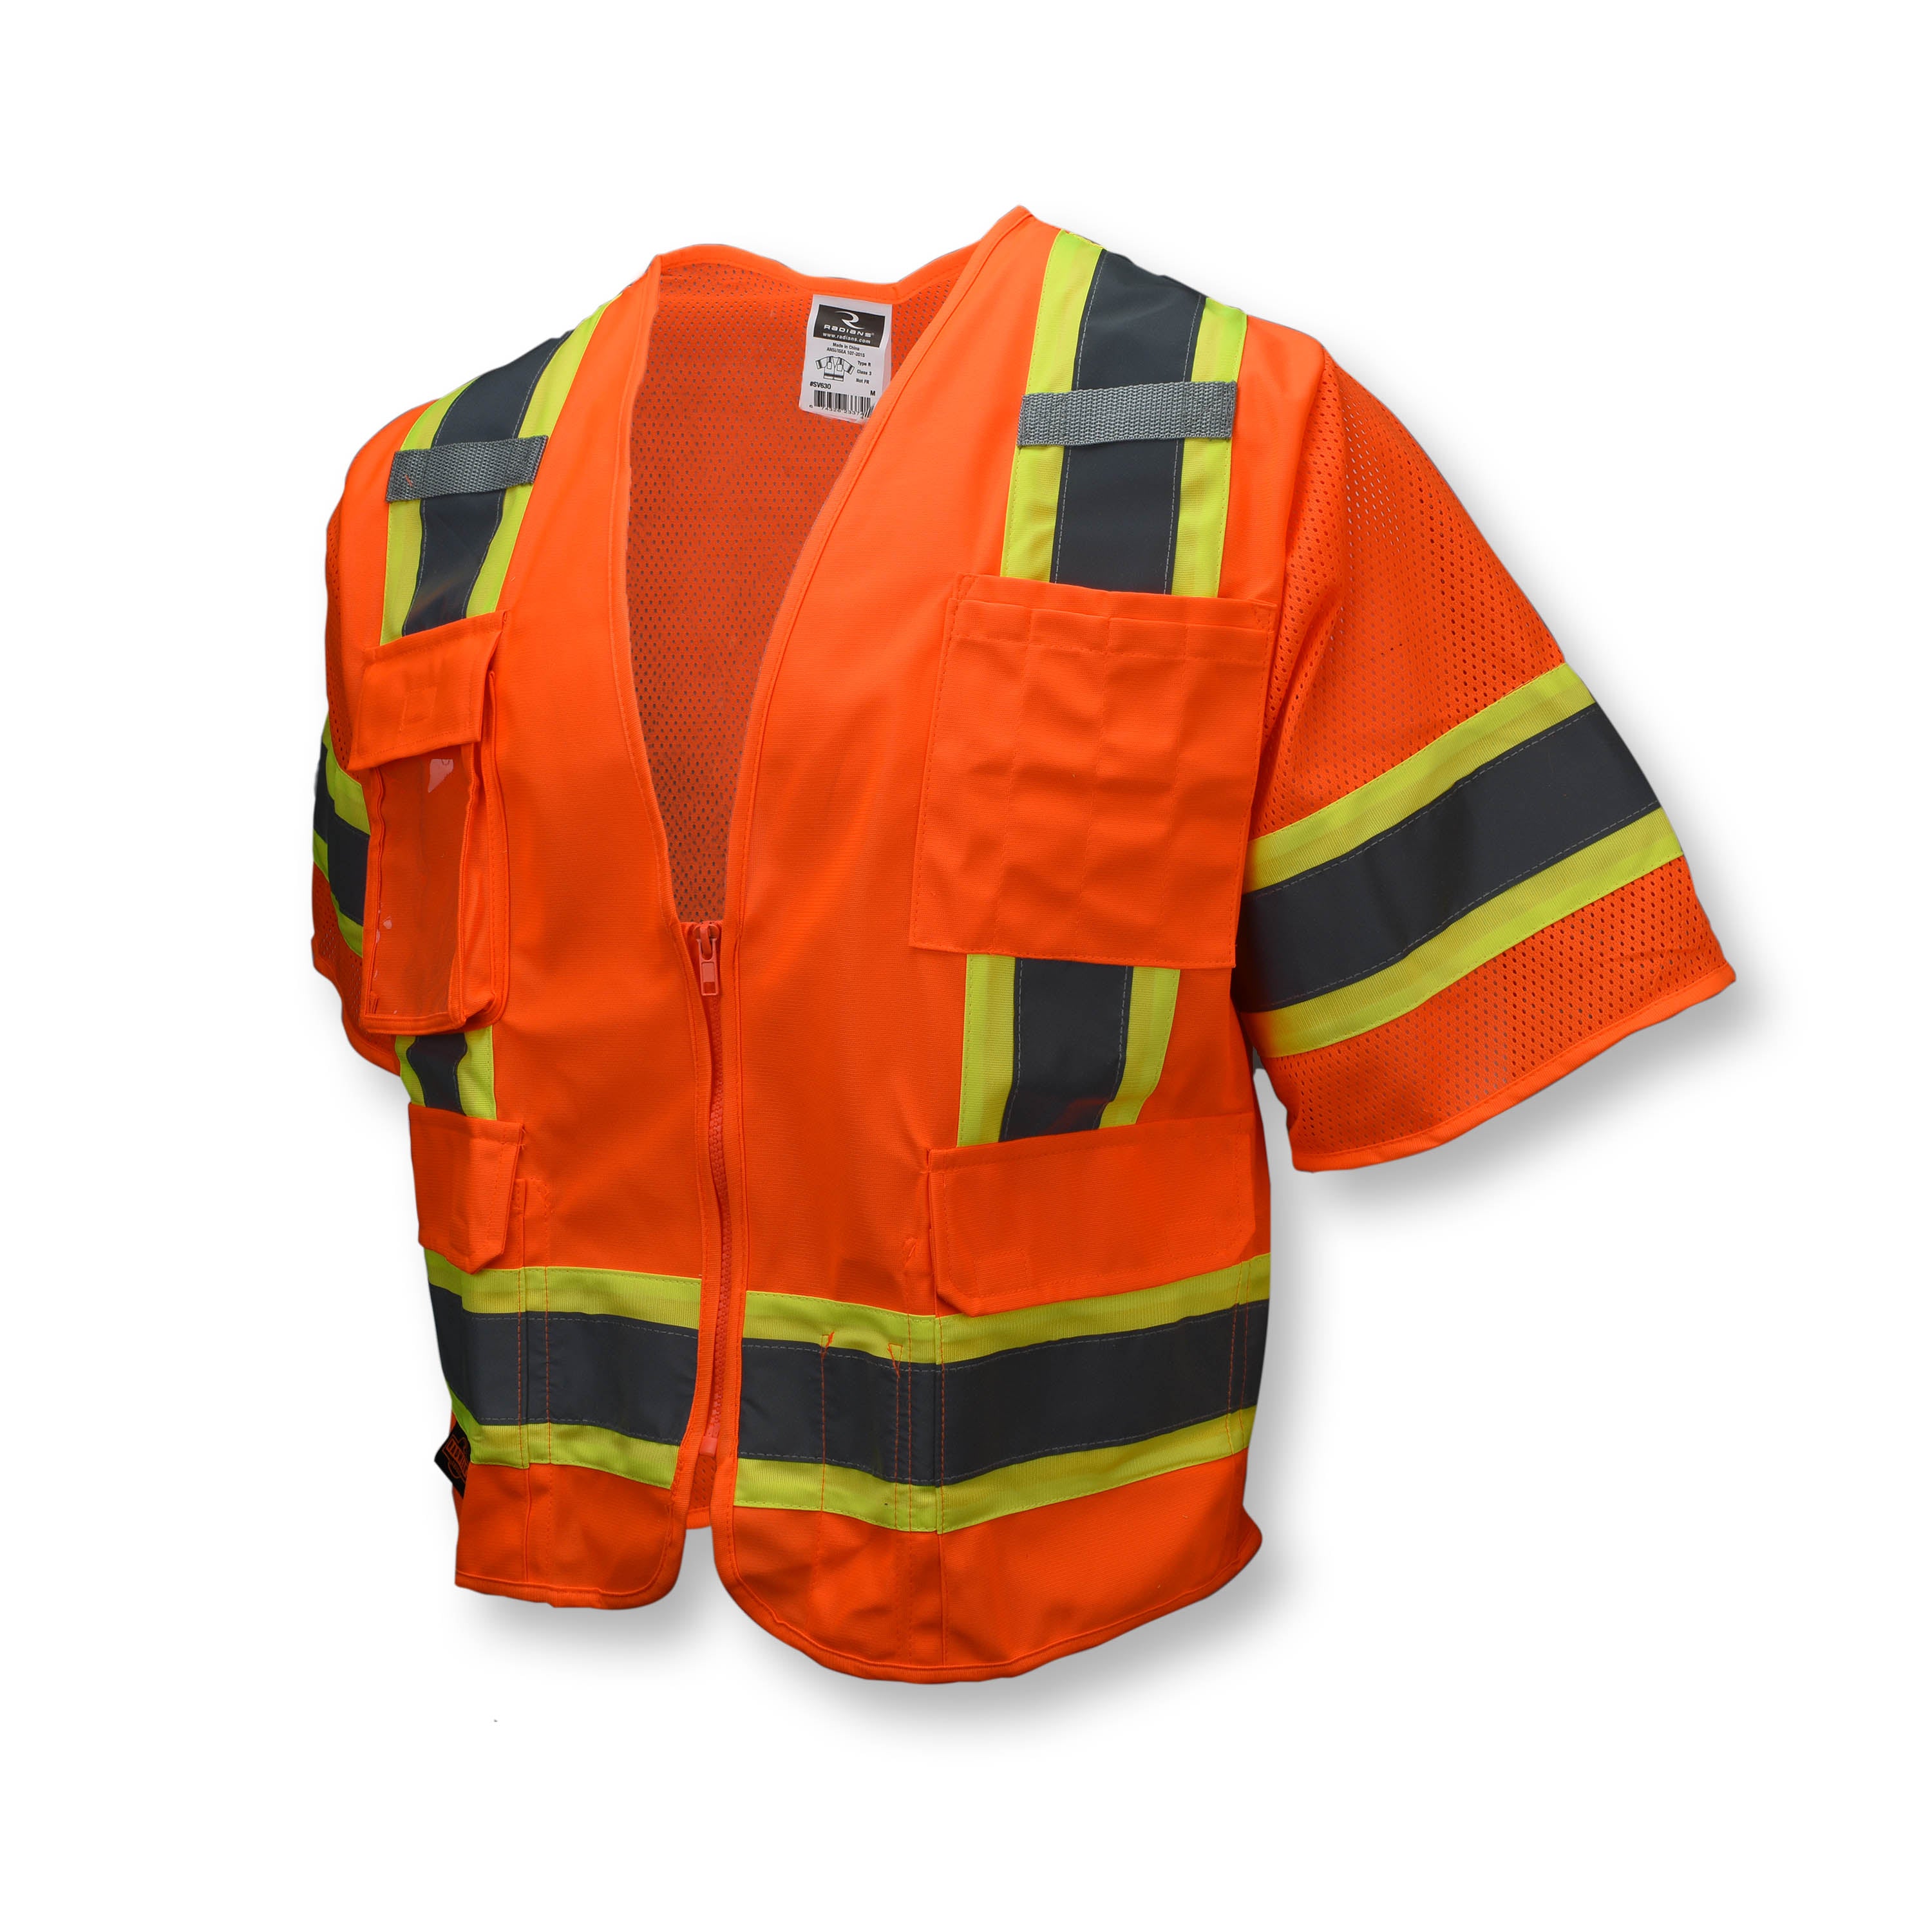 Radians SV63 Two Tone Surveyor Type R Class 3 Two Tone Safety Vest-eSafety Supplies, Inc